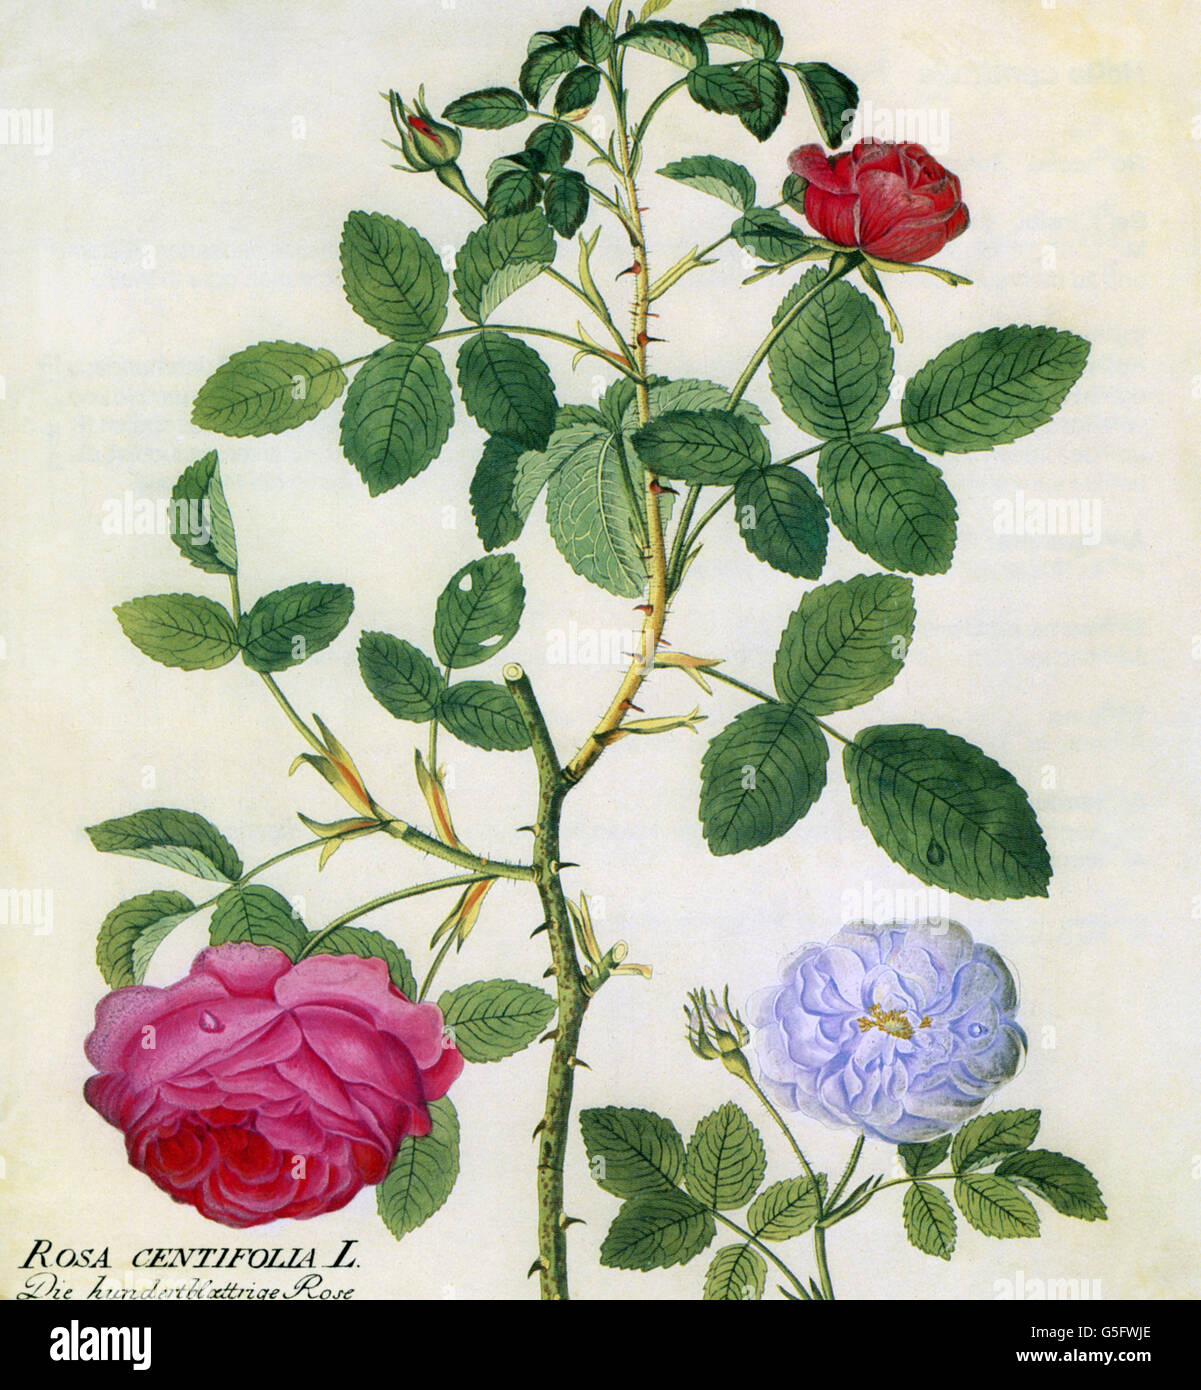 botany, flowers, roses (Rosae), Provence rose (Rosa centifolia L.), branch, leaves, blossom, coloured engraving, 19th century, flower, leaf, blossoms, plant, plants, historic, historical, Additional-Rights-Clearences-Not Available Stock Photo